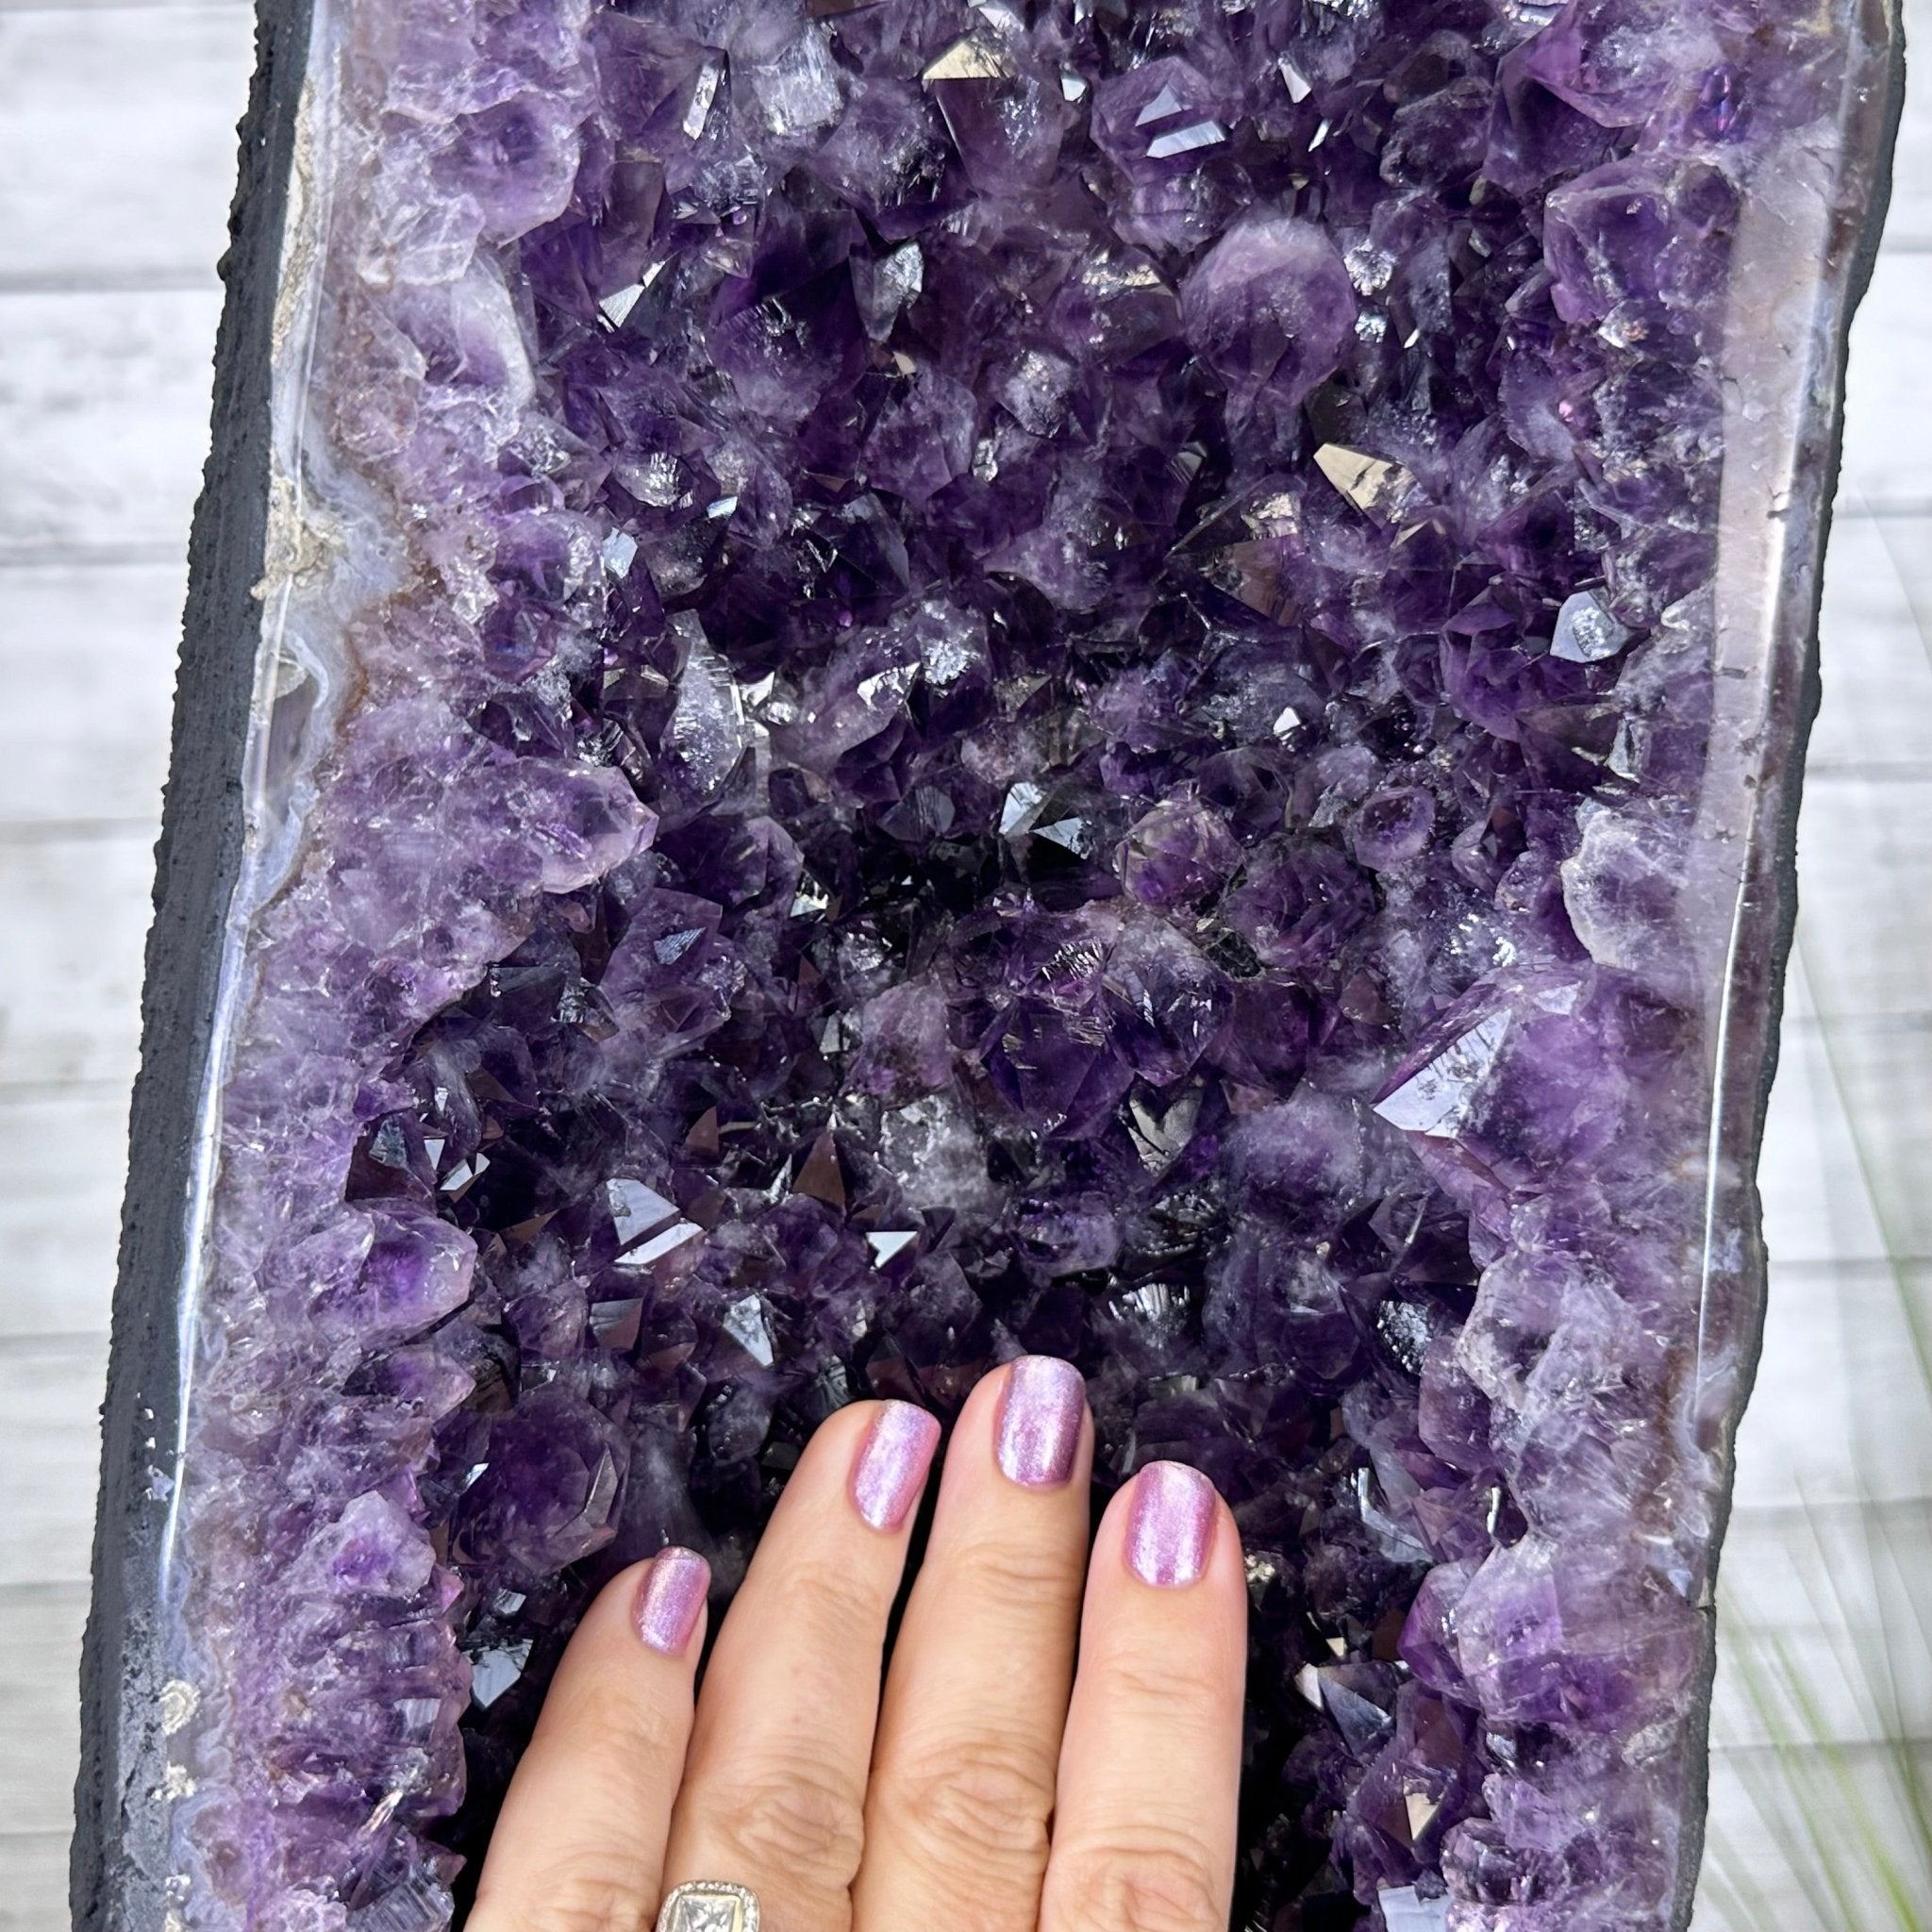 Large Extra Plus Quality Brazilian Amethyst Cathedral, 121 lbs & 69" Tall #5601-1332 - Brazil GemsBrazil GemsLarge Extra Plus Quality Brazilian Amethyst Cathedral, 121 lbs & 69" Tall #5601-1332Cathedrals5601-1332